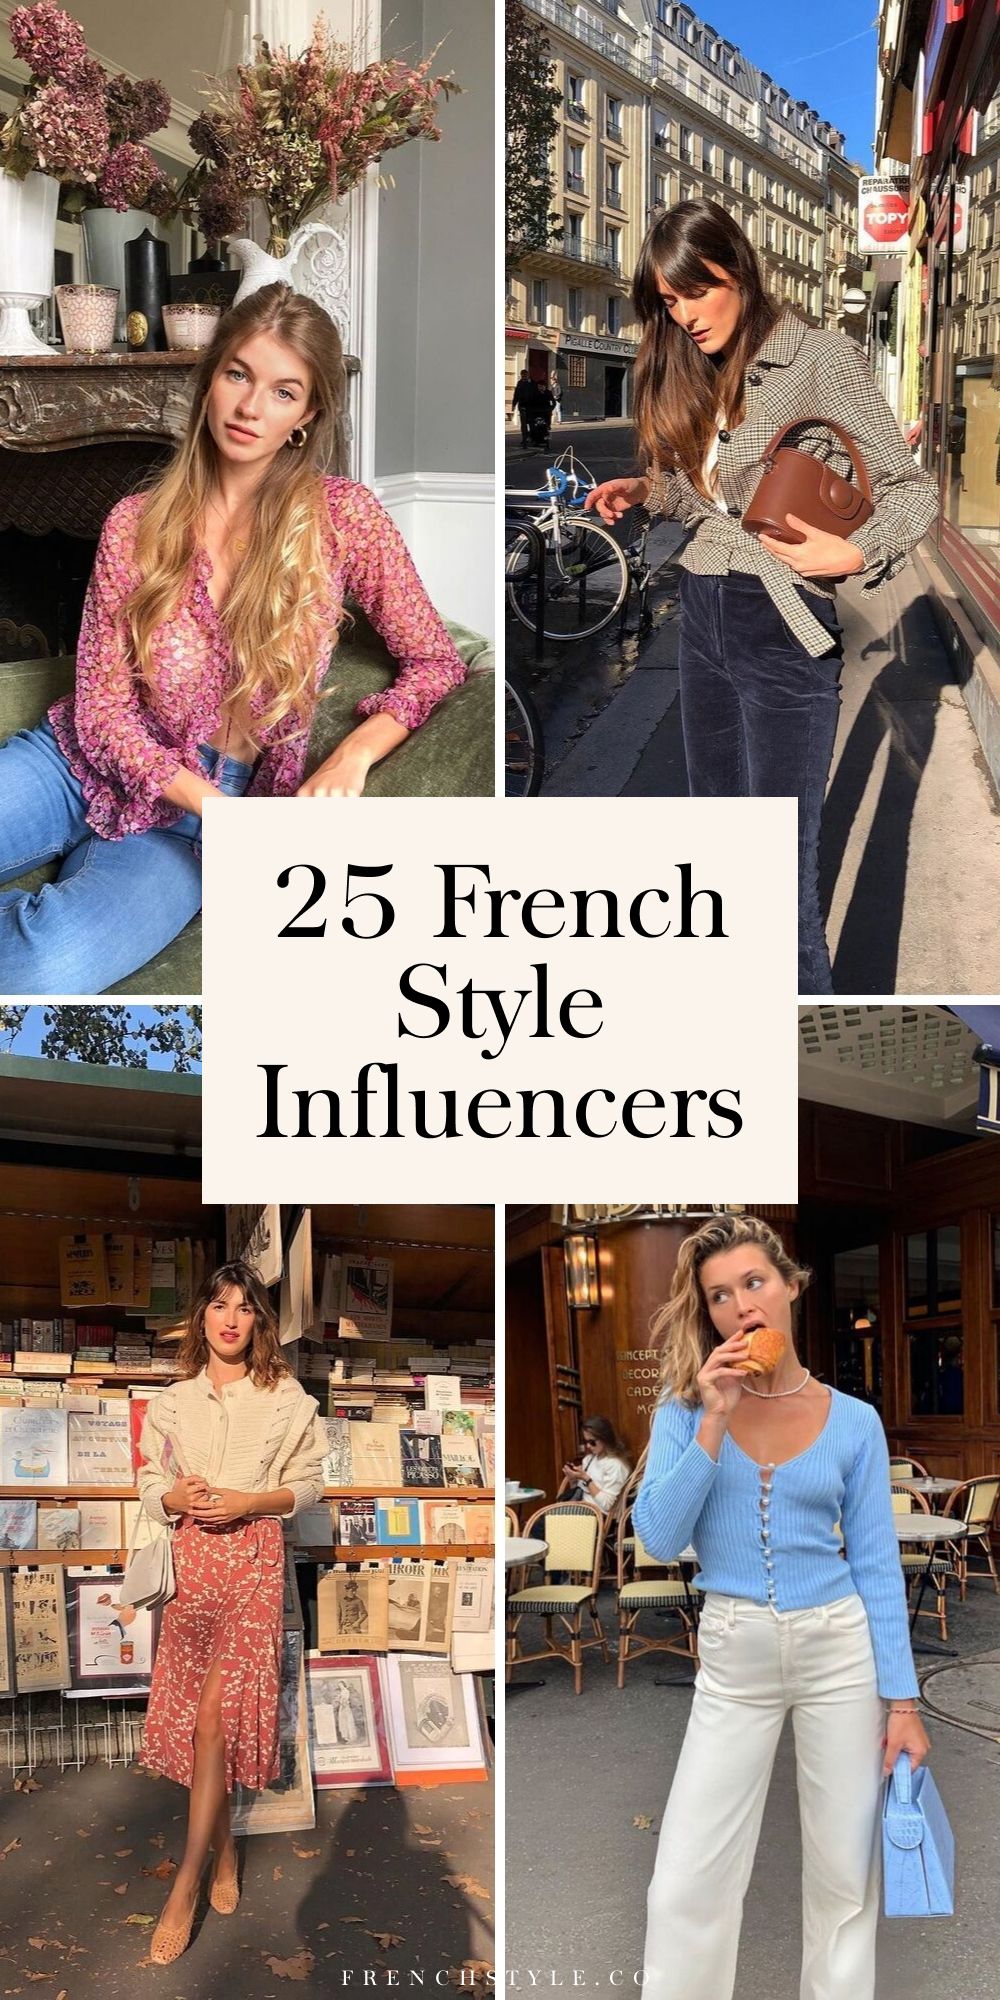 25 French Style Influencers to Know